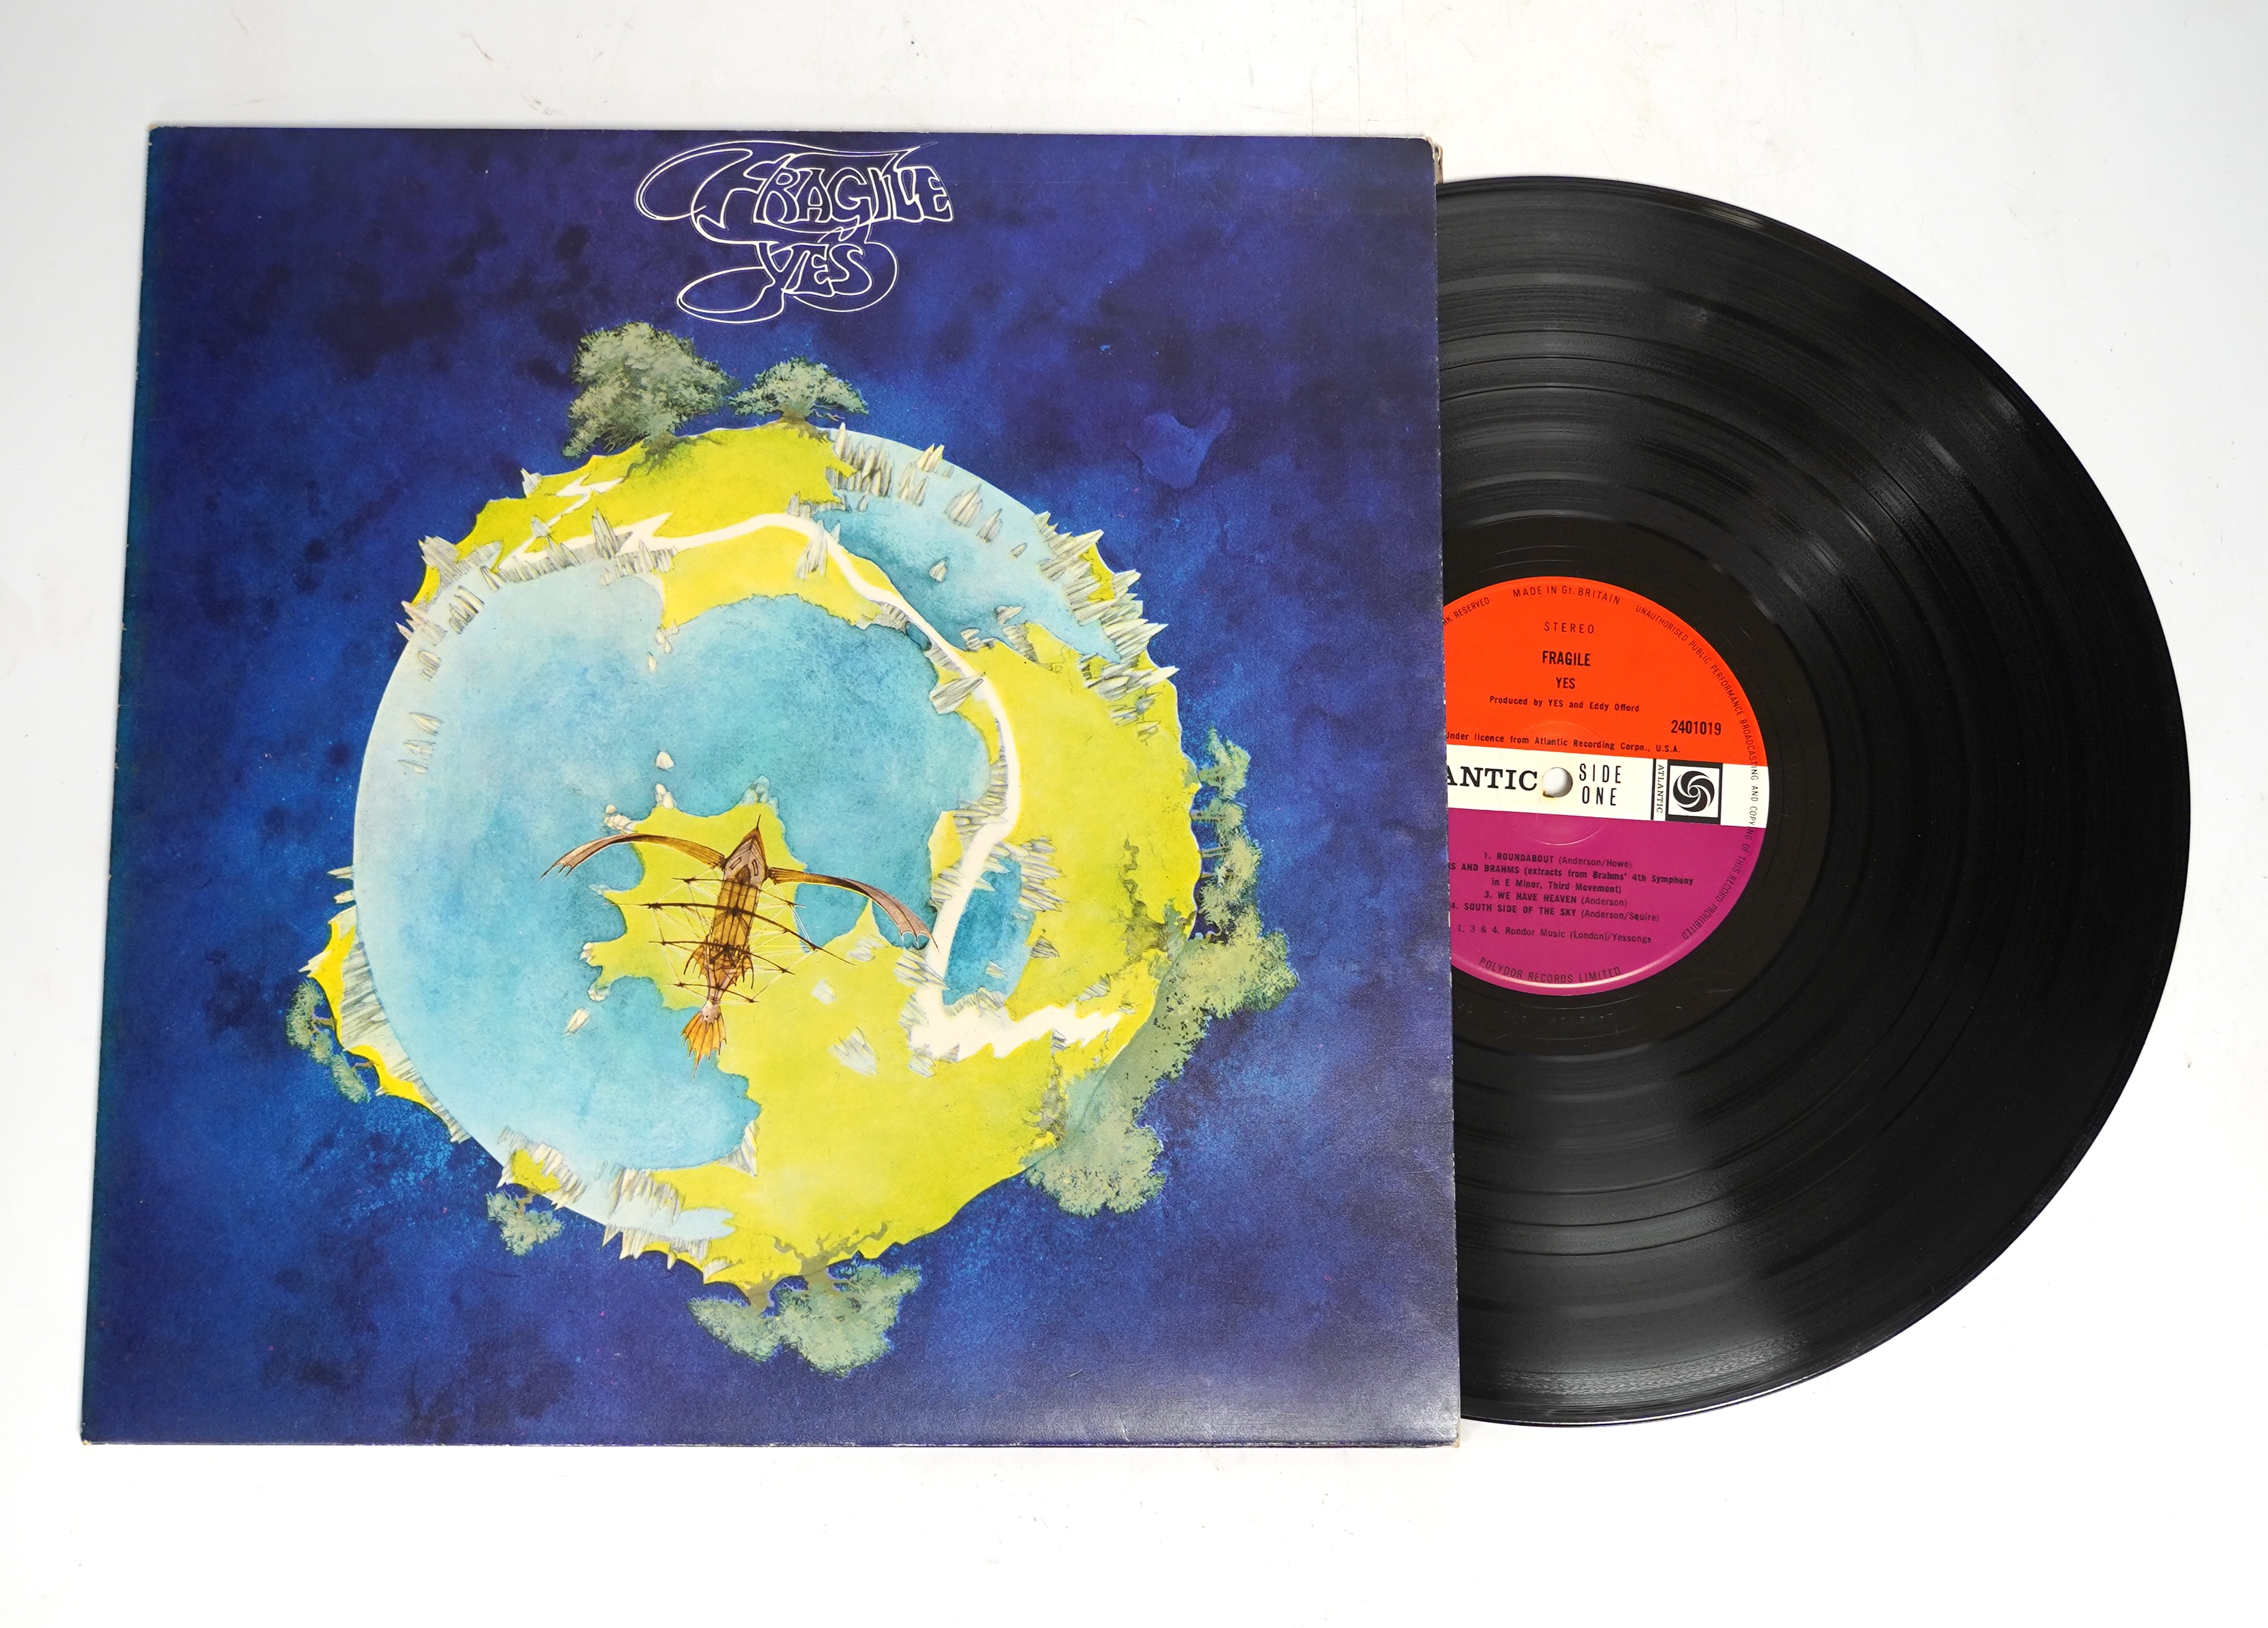 Yes; Fragile LP record album, on Atlantic red and plum 2401019, gratefold cover with inner booklet